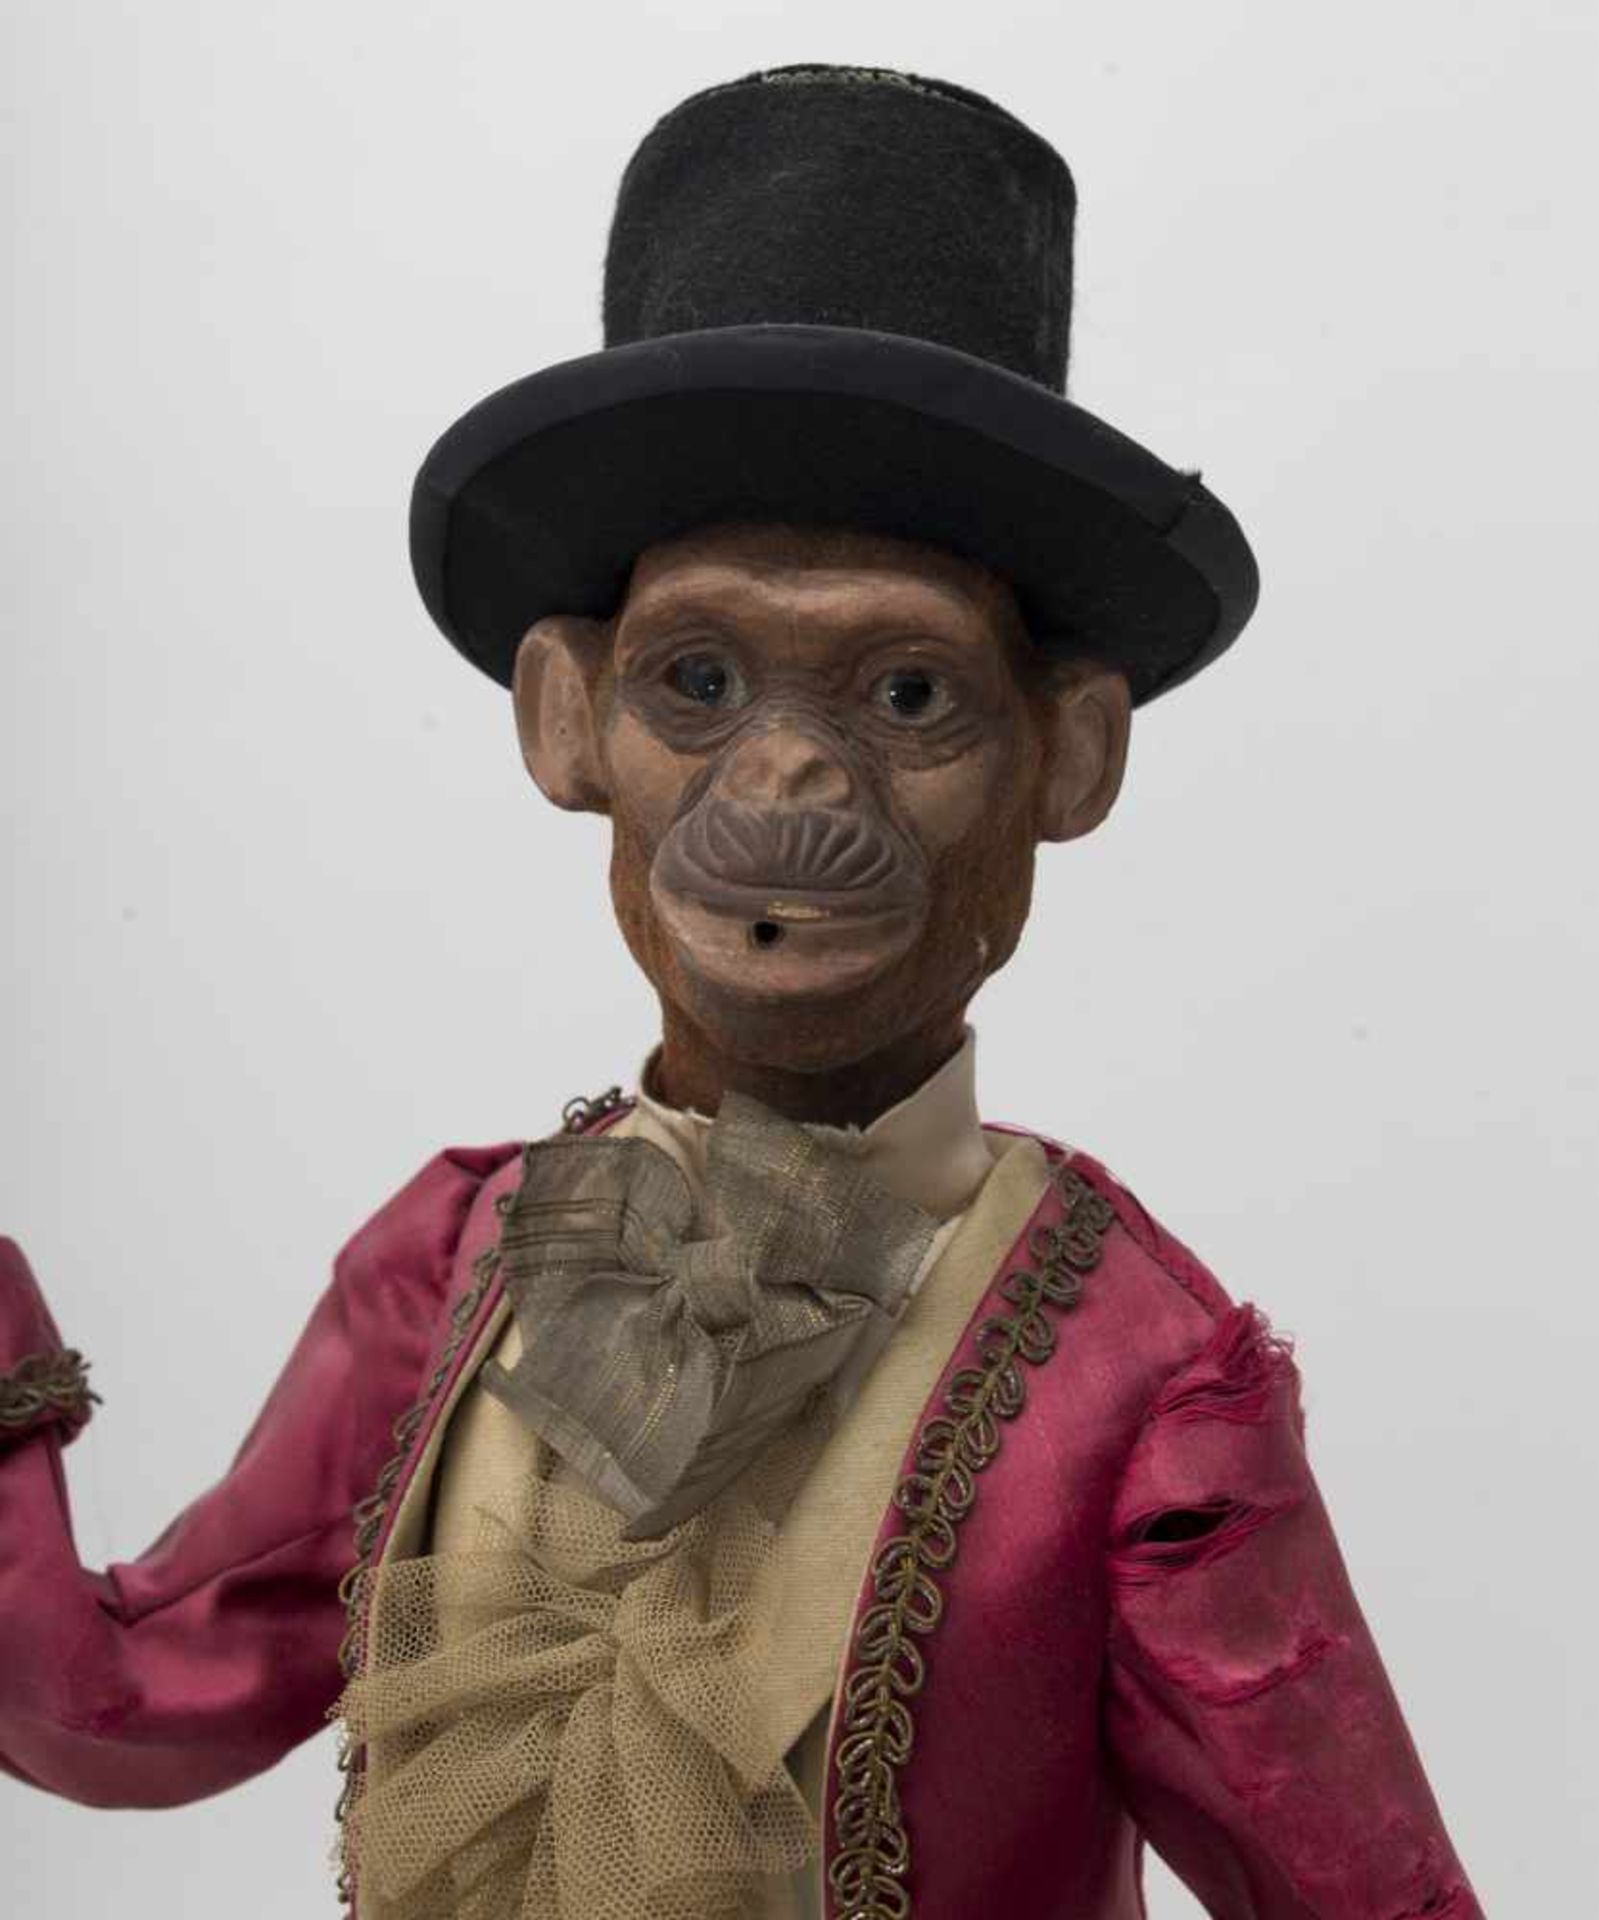 The DANDY FUMEUR  ROULLET DECAMPS style automaton, depicting a person with a smoking monkey’s - Bild 2 aus 2